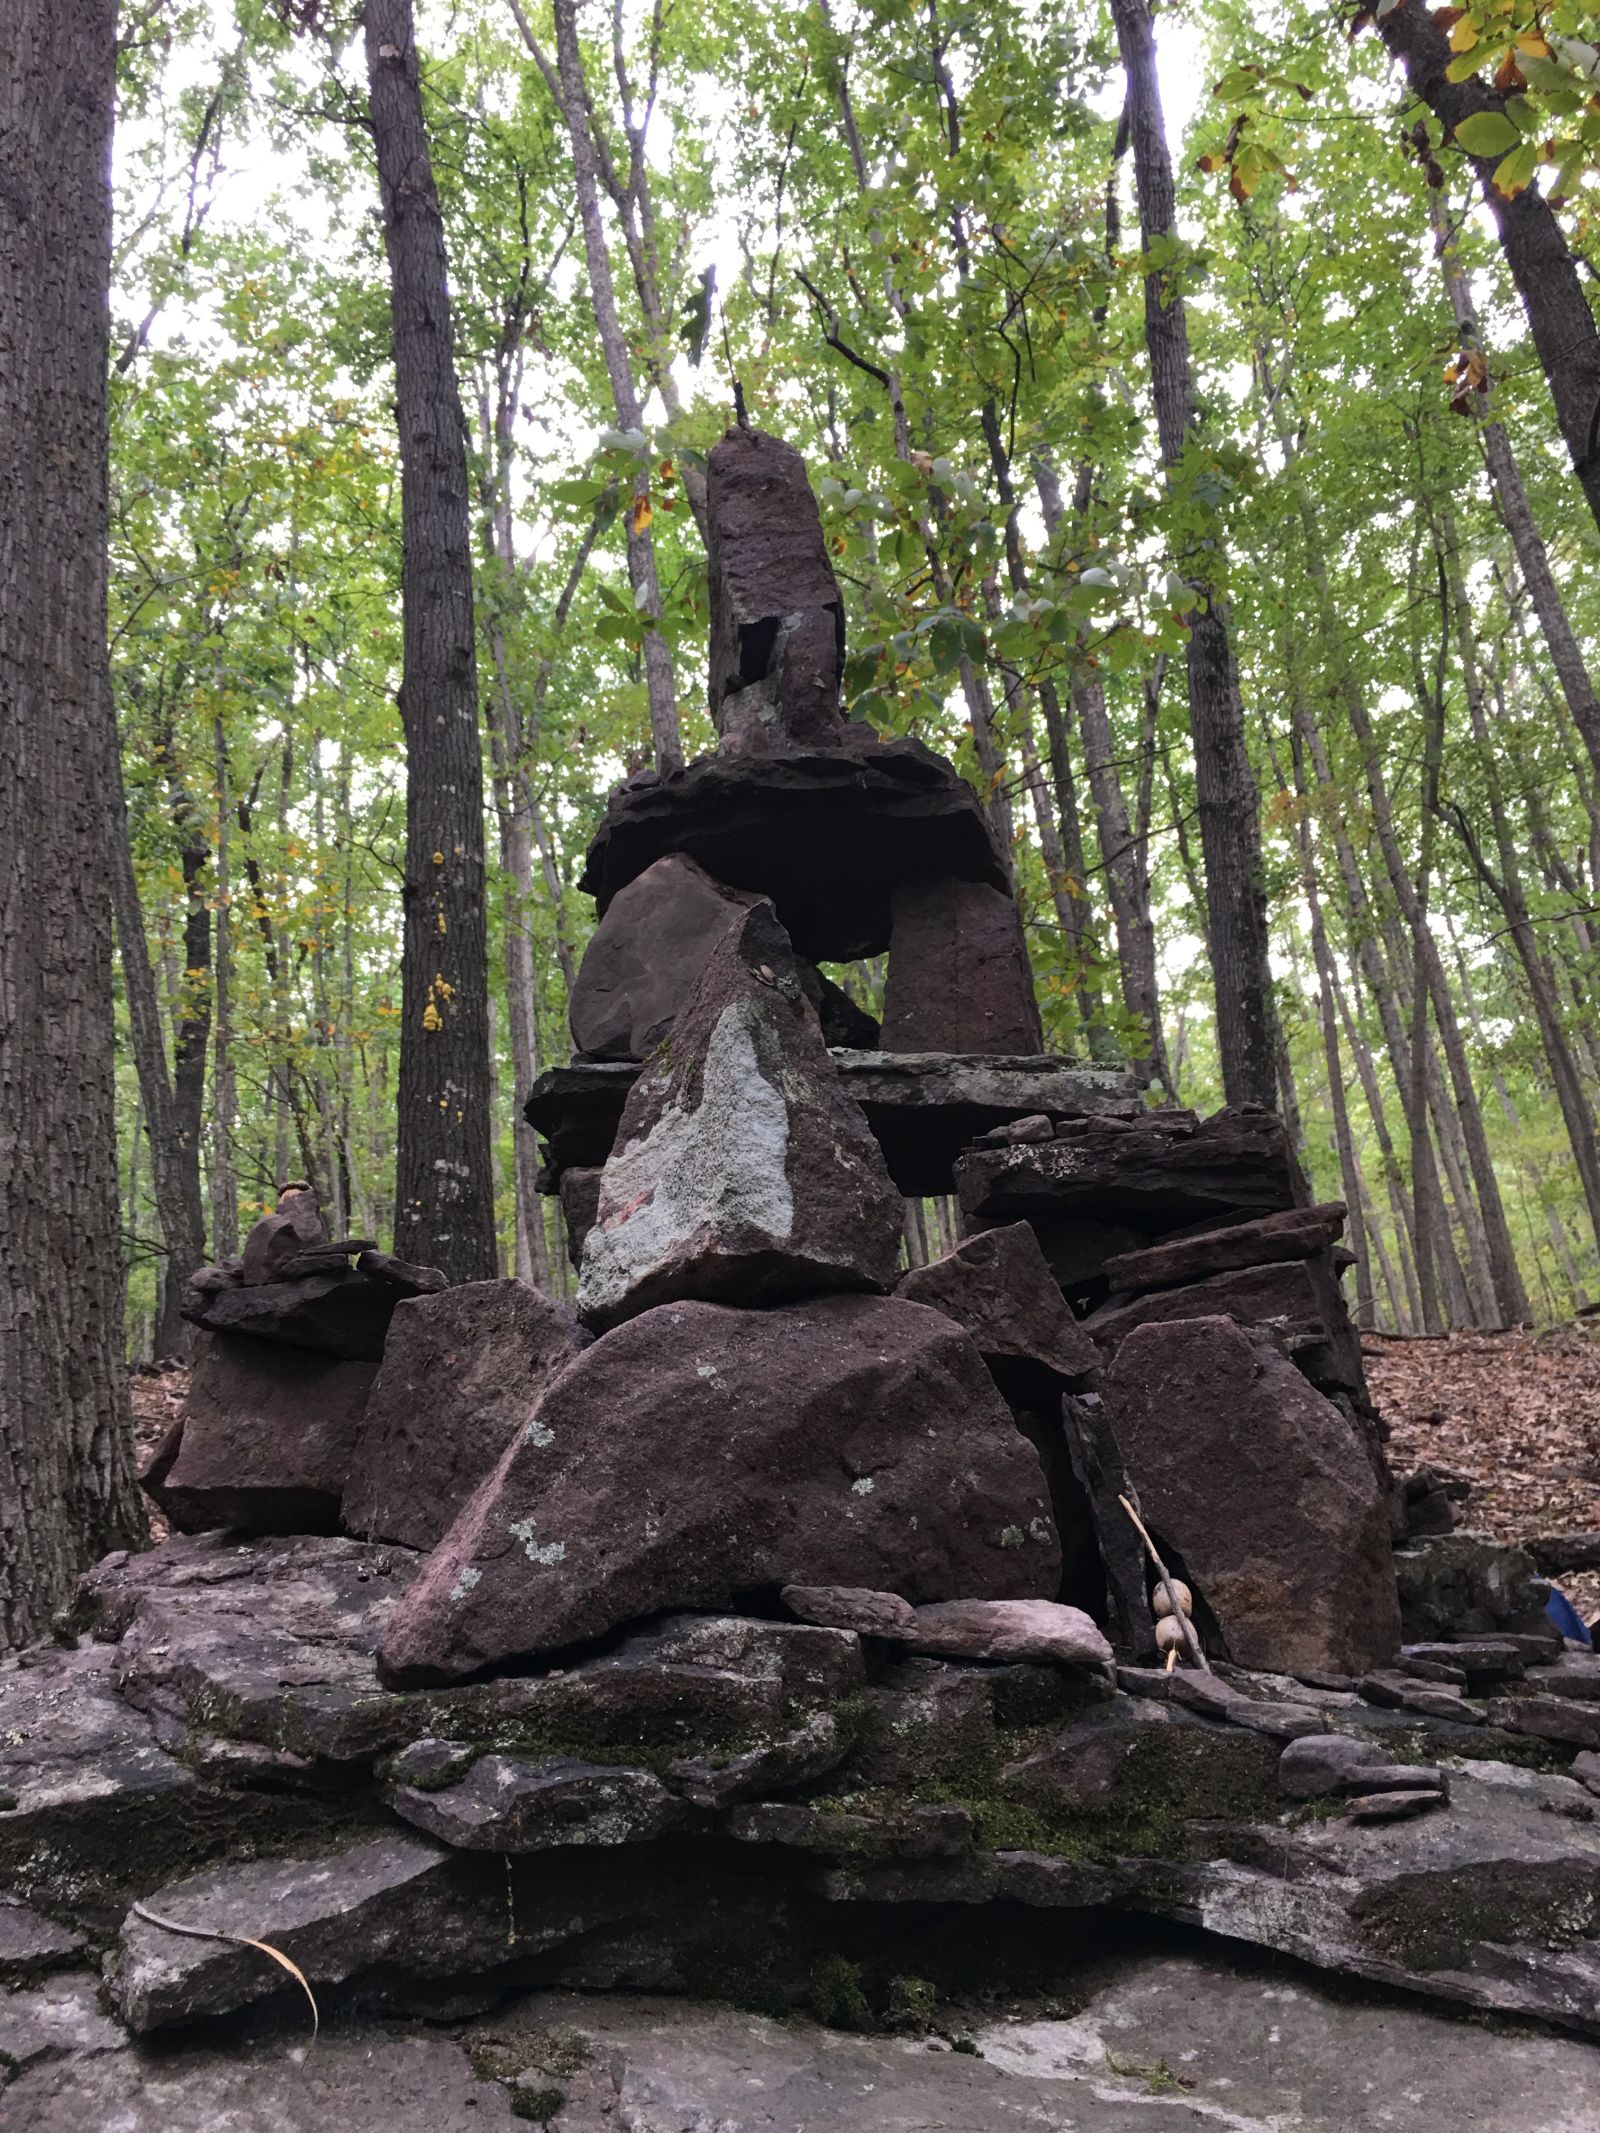 Yes we built this, if you’re hiking in the Seneca rock area and you find this know it was us 🙂